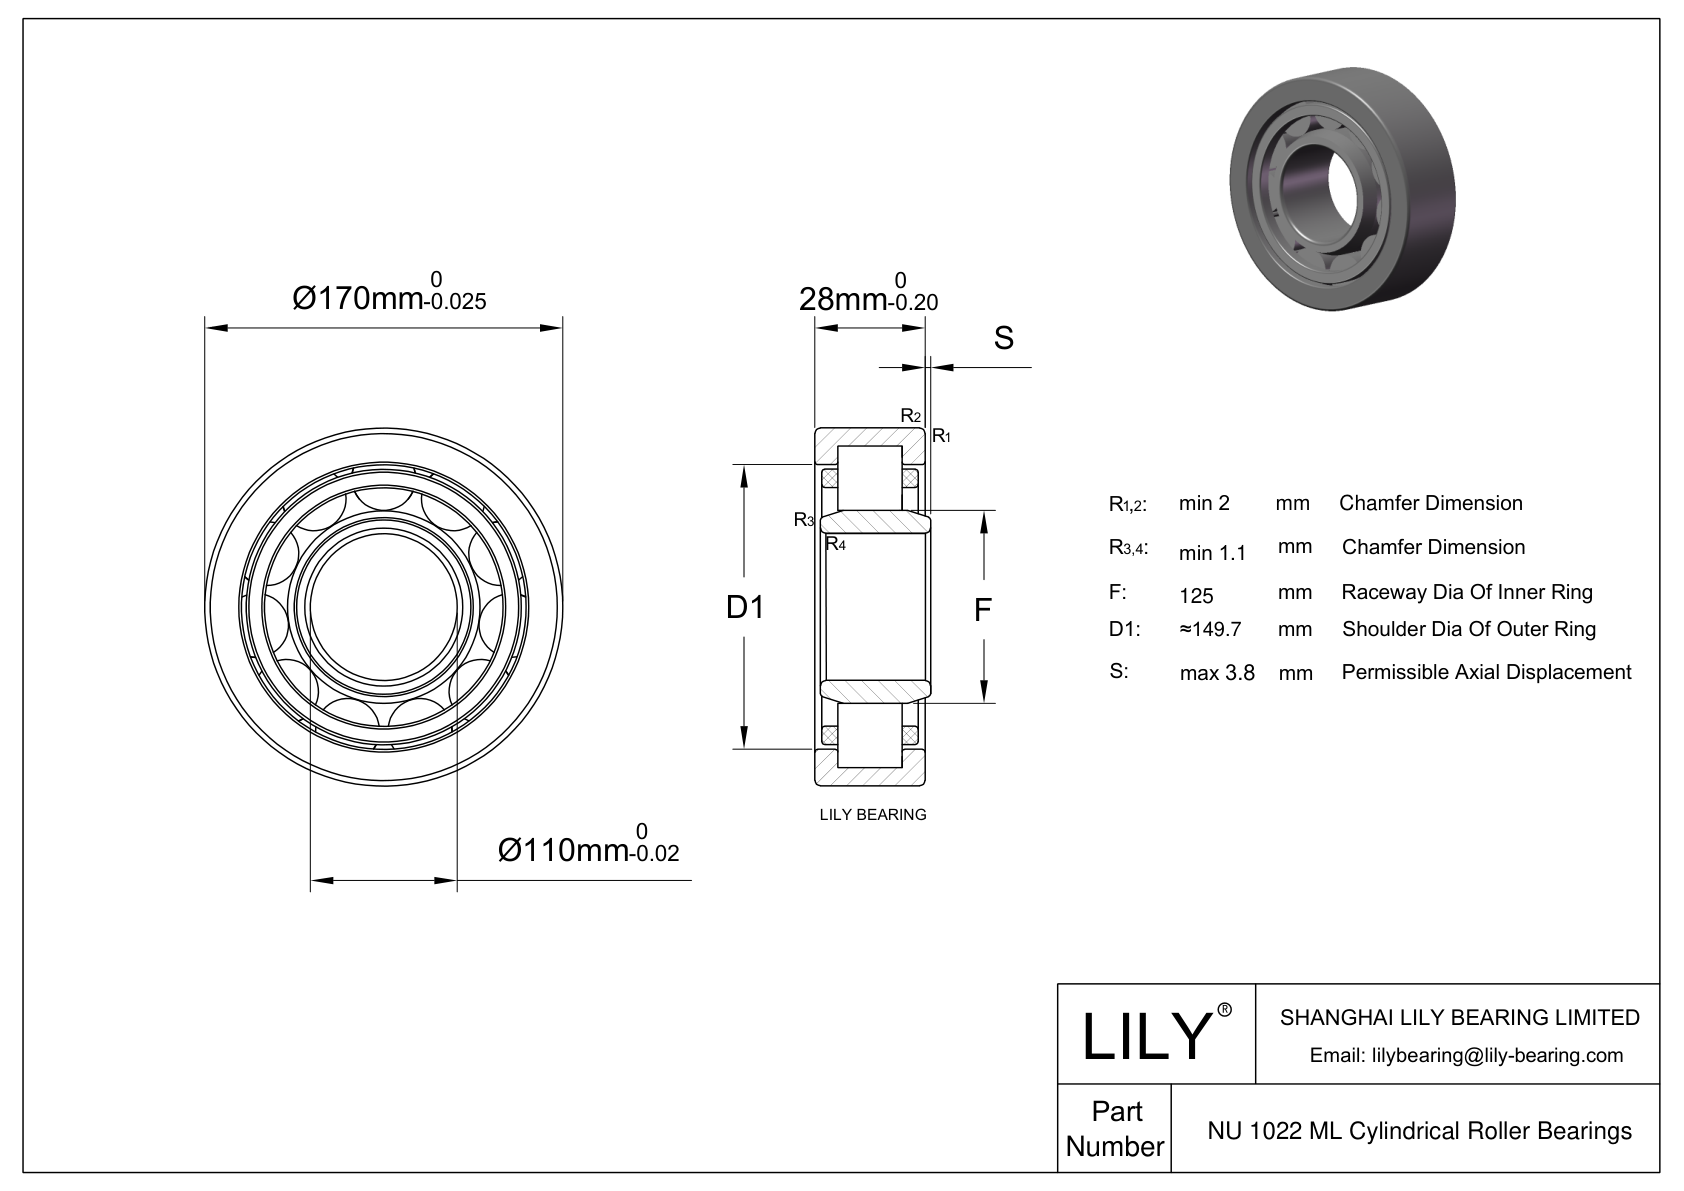 NU 1022 M/C3VL0241 Ceramic Coated Cylindrical Roller Bearings cad drawing